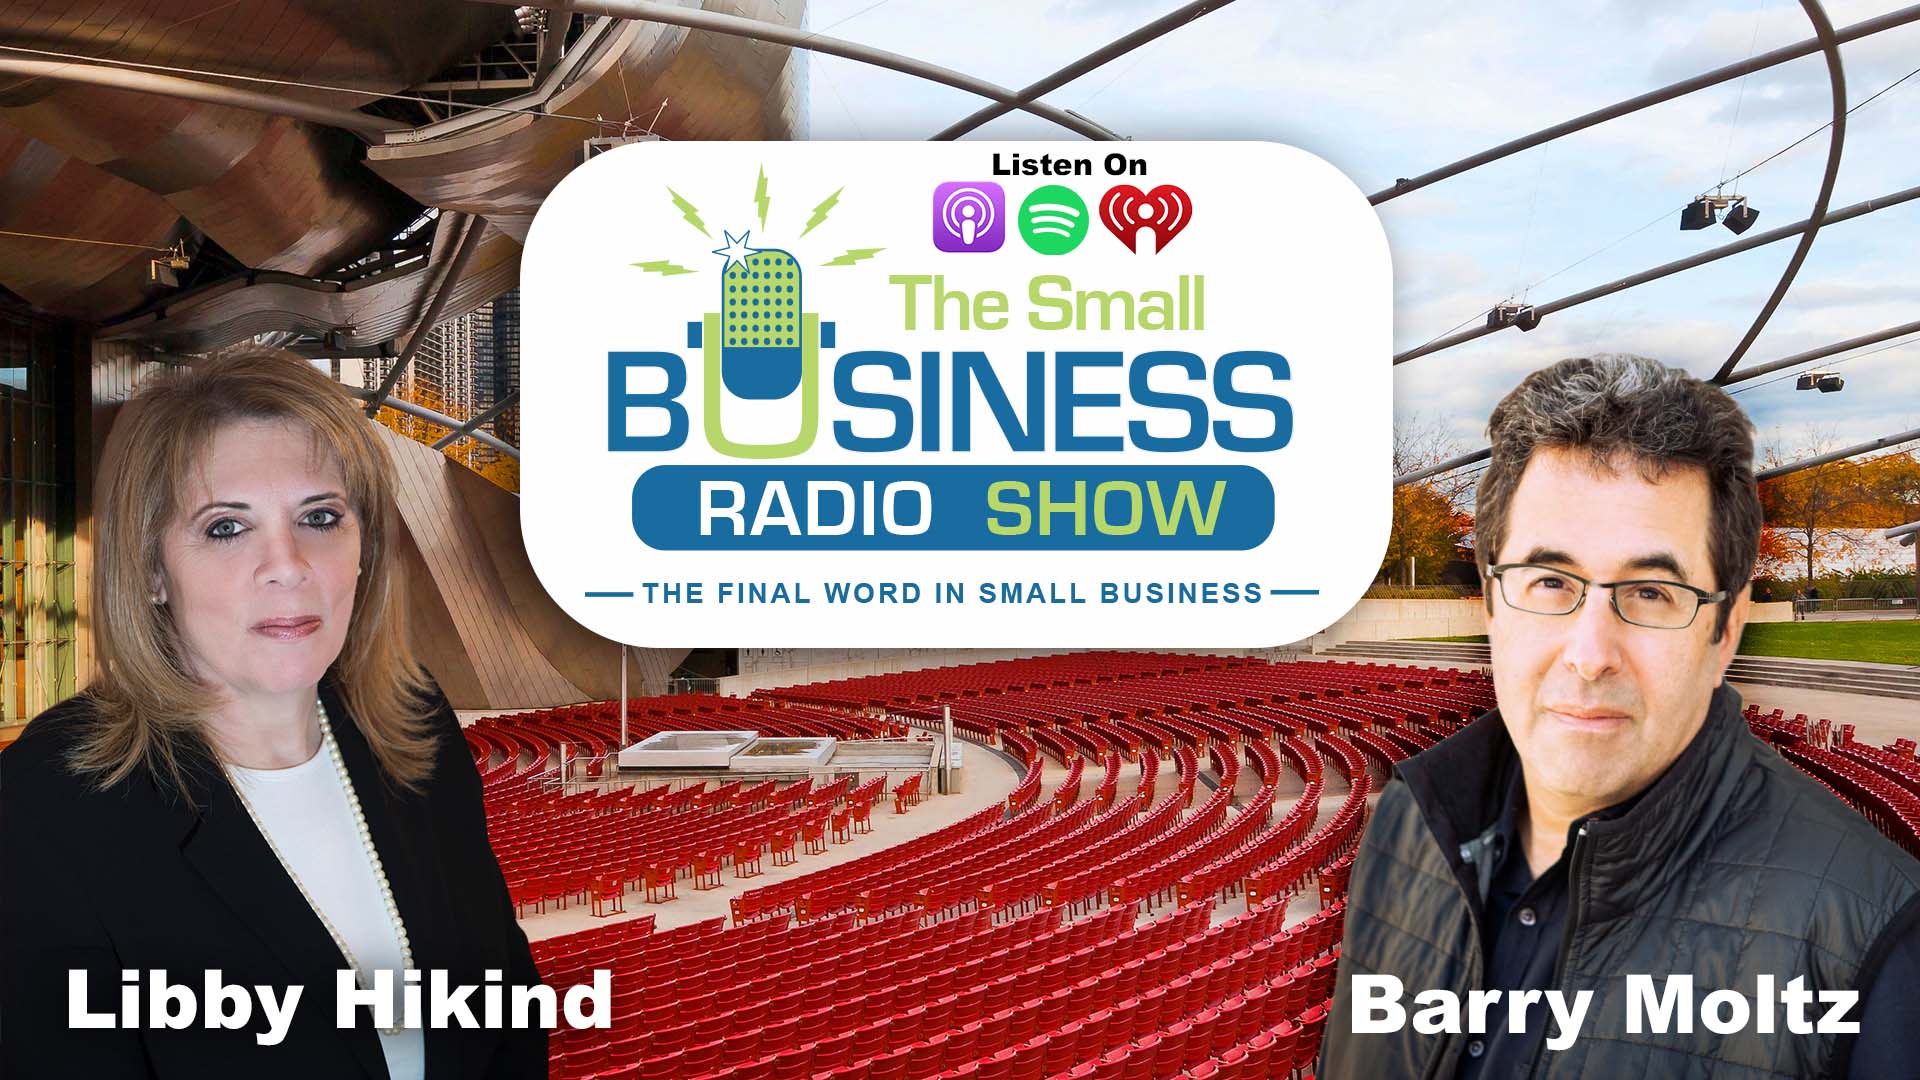 Libby Hikind on The Small Business Radio Show